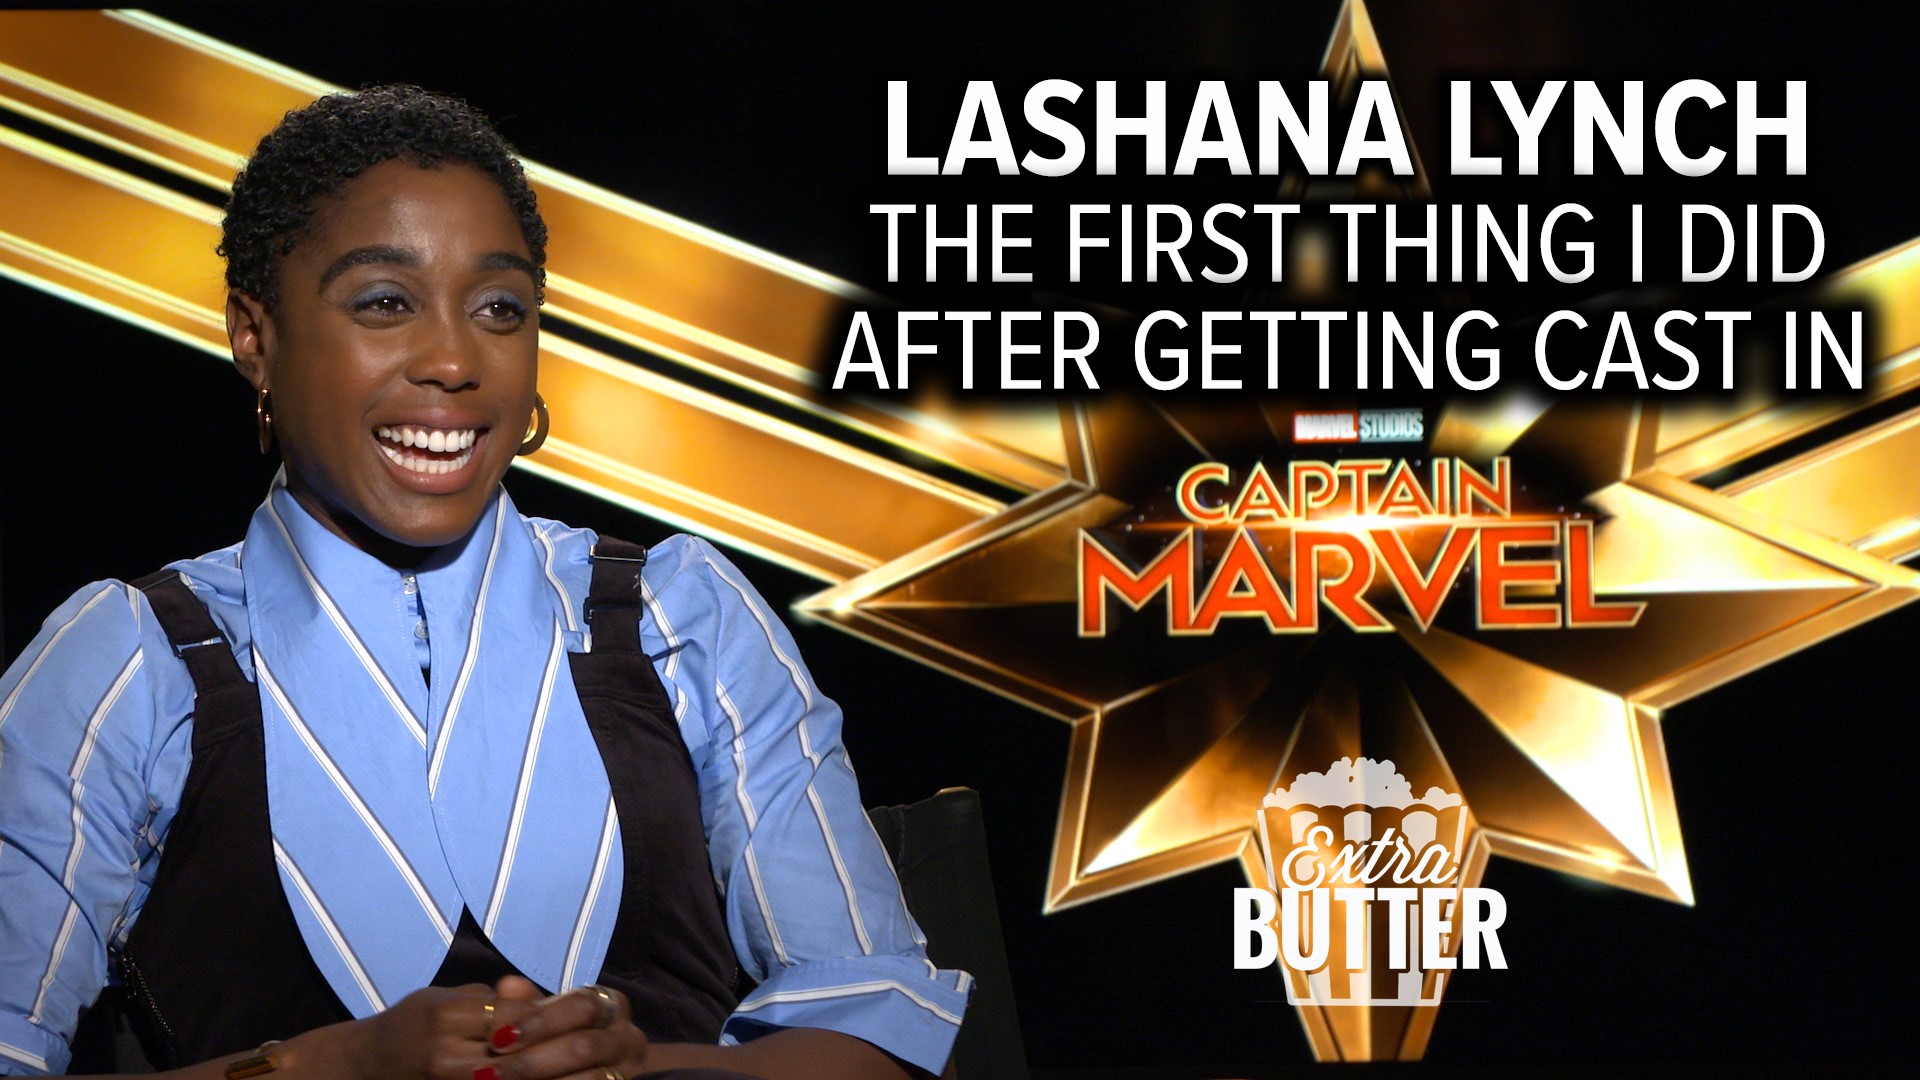 Lashana Lynch talks about her relationship with Brie Larson, and their characters Carol and Maria in the movie 'Captain Marvel.' Lashana tells Kelly Savanna Deaton about the important message of the movie. She also talks about her love of the Walkman and how she found out she got a role in the movie. Interview arranged by Walt Disney Studios Motion Pictures.